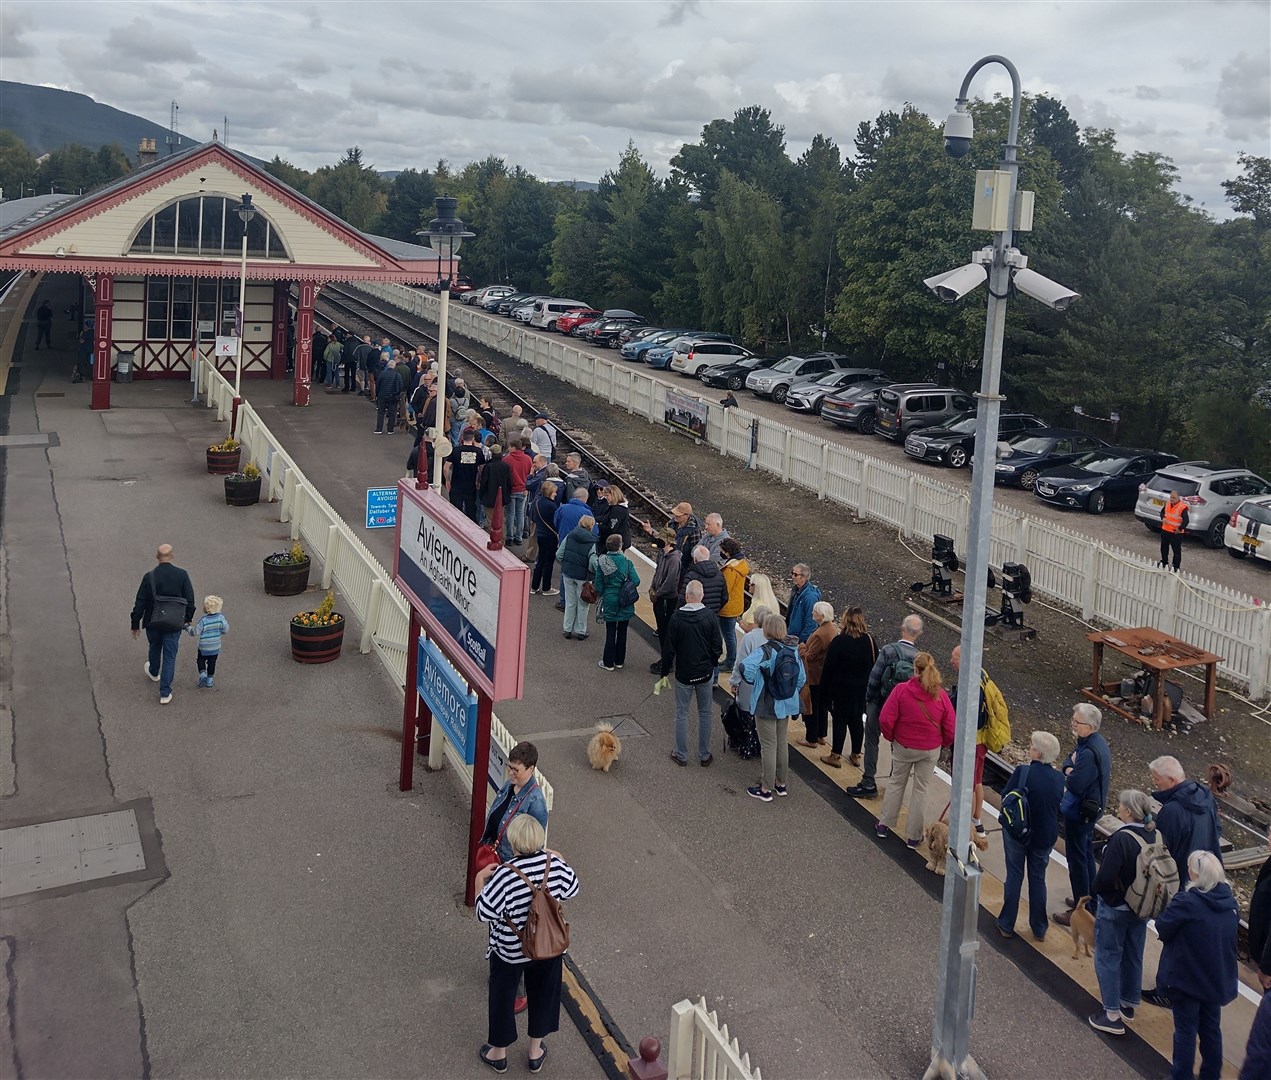 Aviemore Station was packed as queues extended down the whole platform and over the bridge in anticipation of their trip to Broom hill on the most famous train of them all